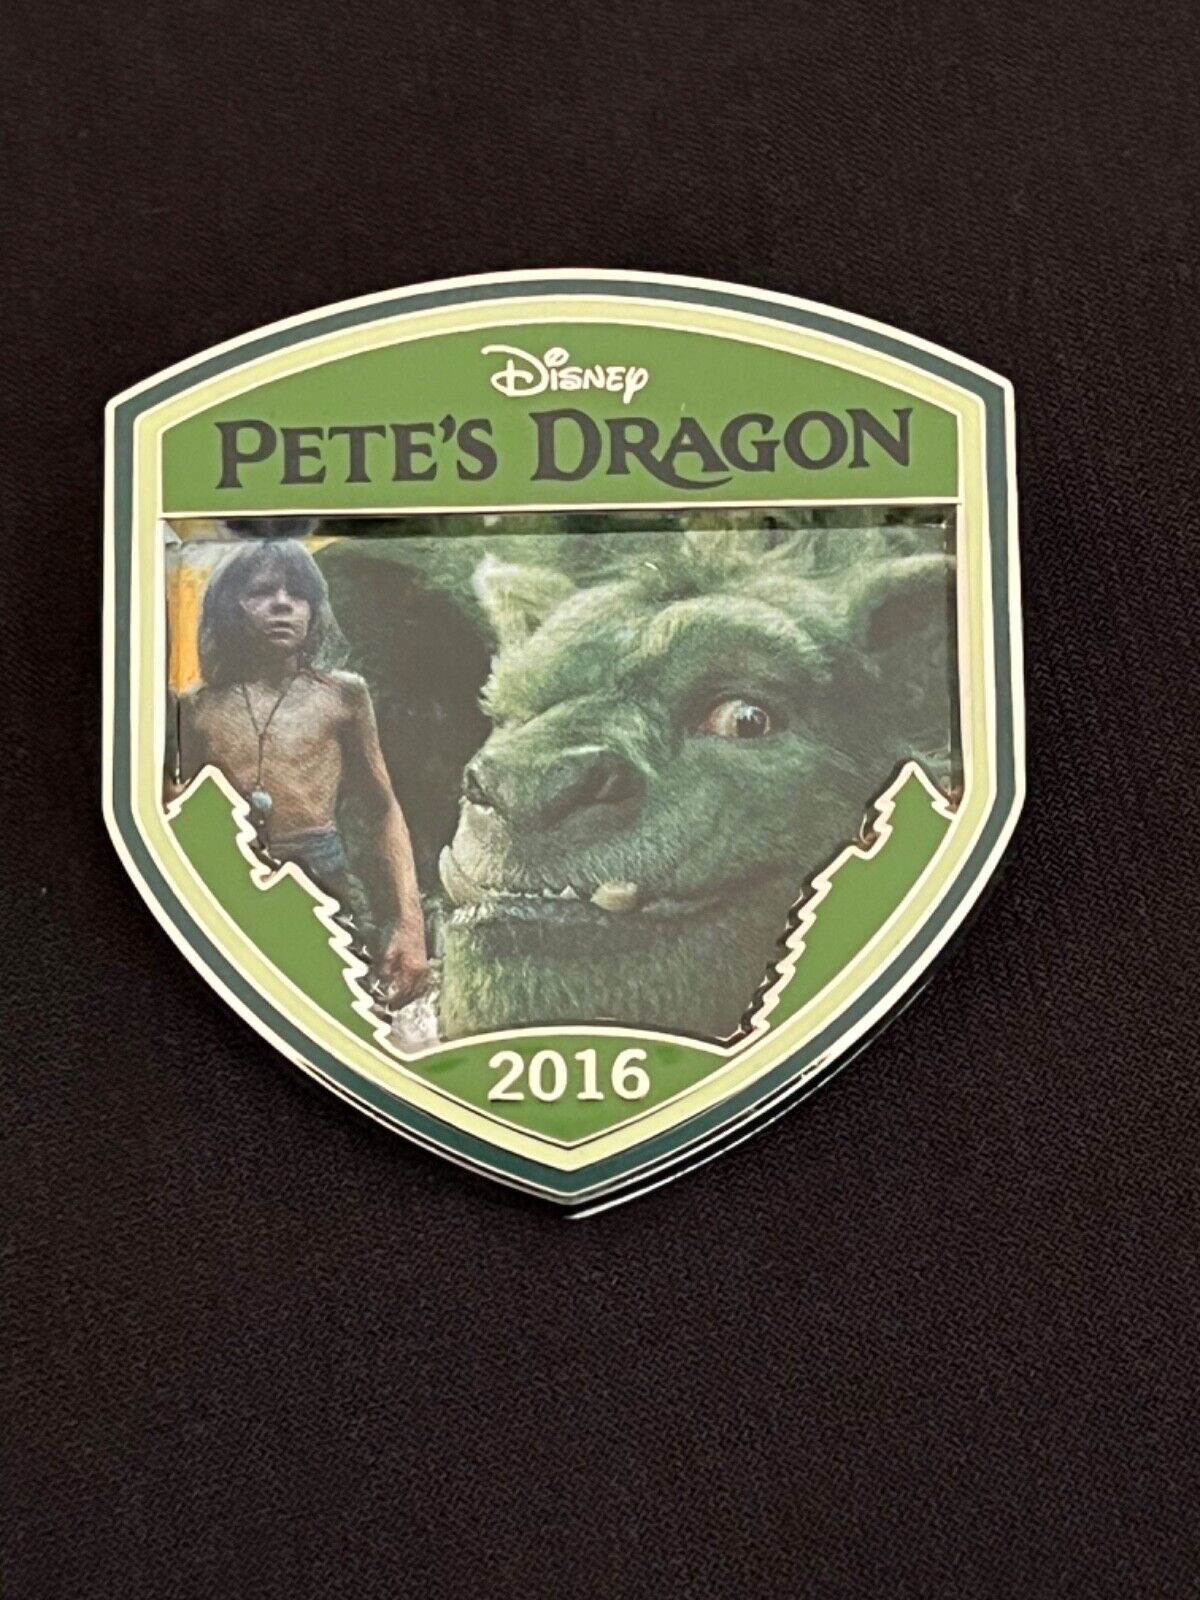 Disney Pins * PETE’S DRAGON * LIVE ACTION * 2016 * LIMITED EDITION 2000